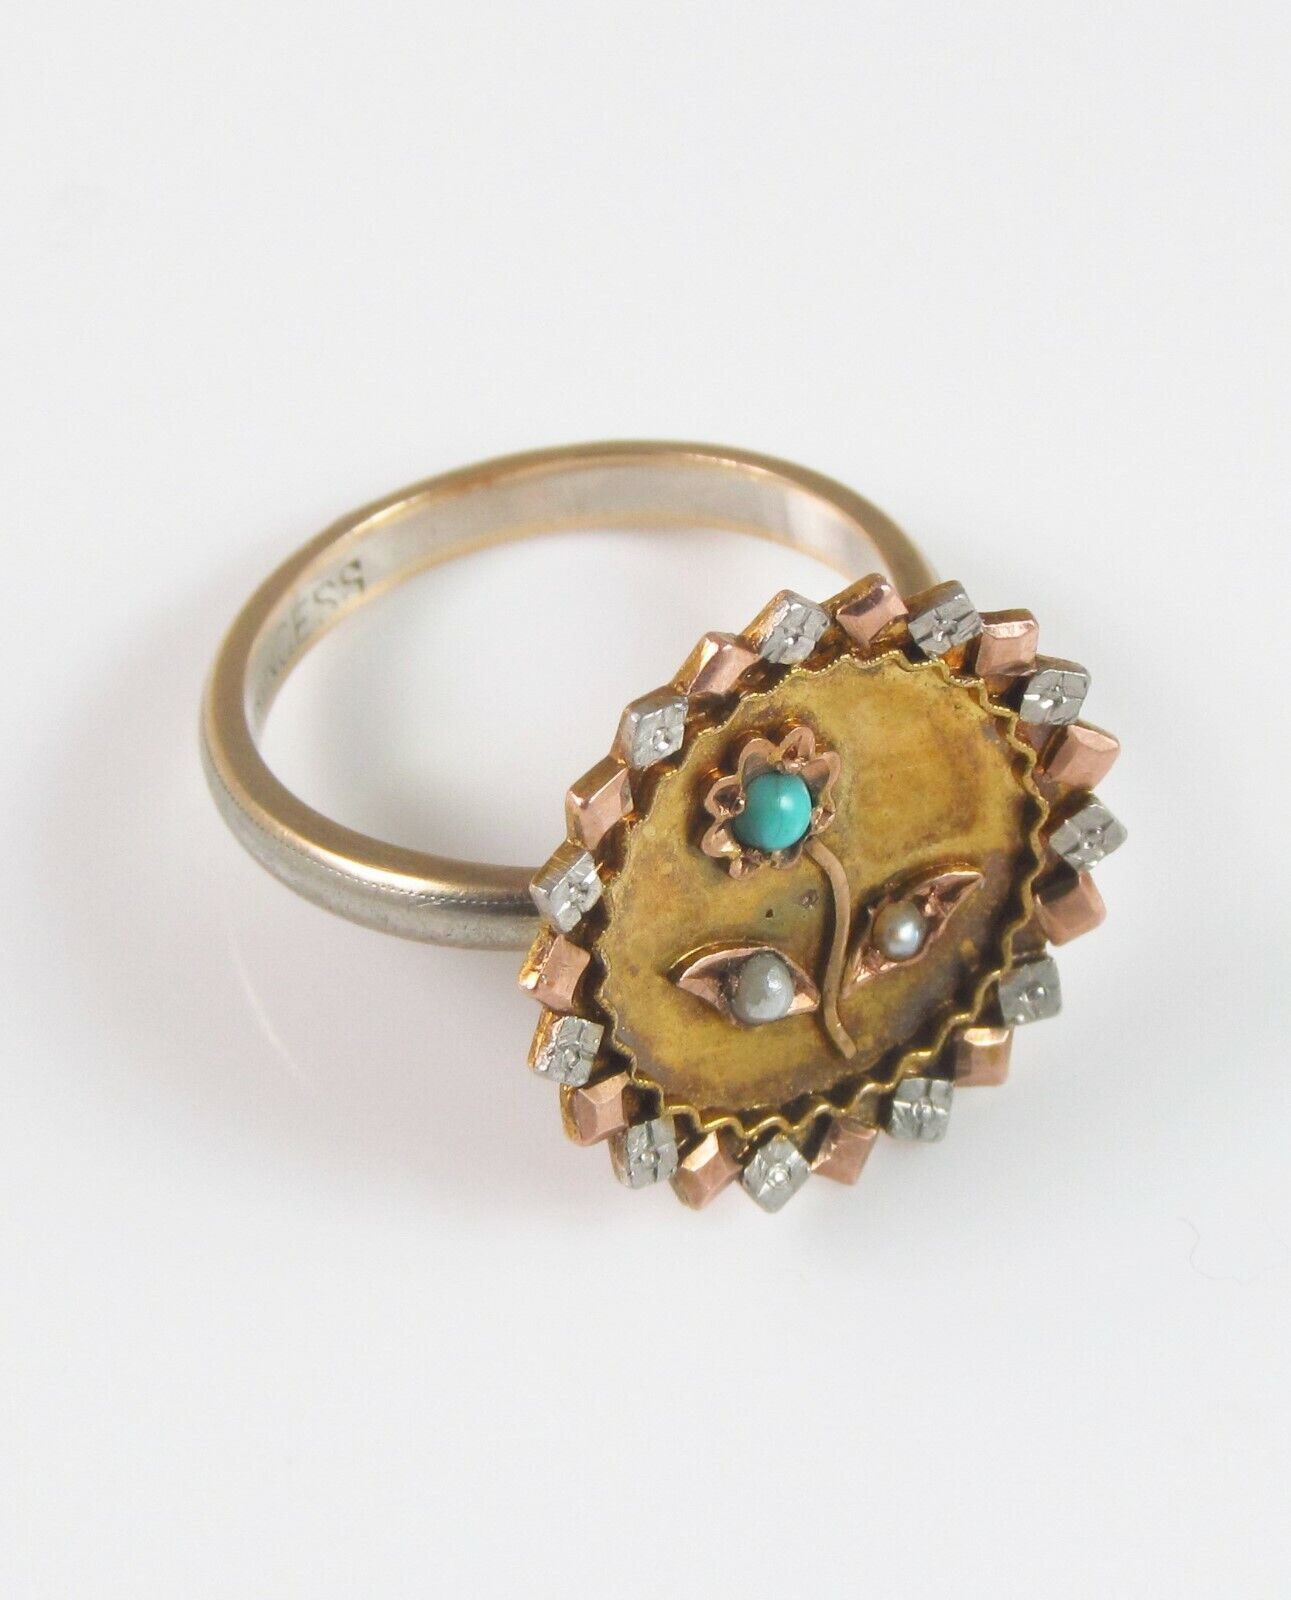 Antique 10K Gold Victorian Turquoise & Pearl Flower Conversion Ring Size 5.75